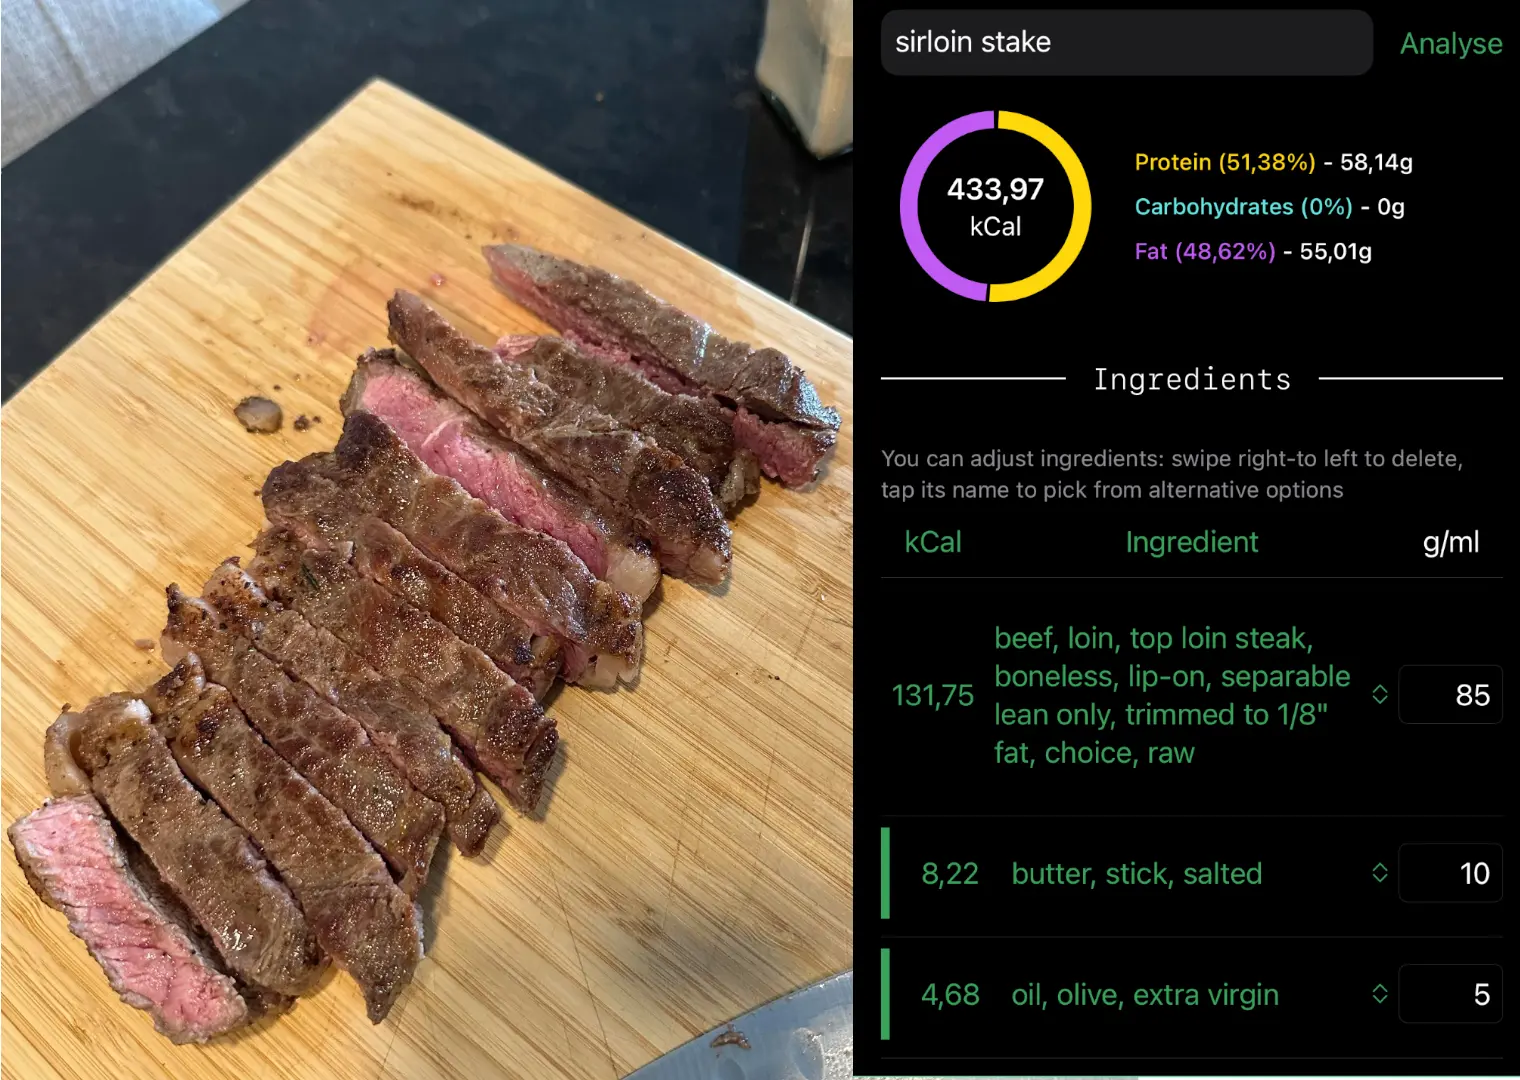 App extracts ingredients and allows to adjust them with remove/edit/add options